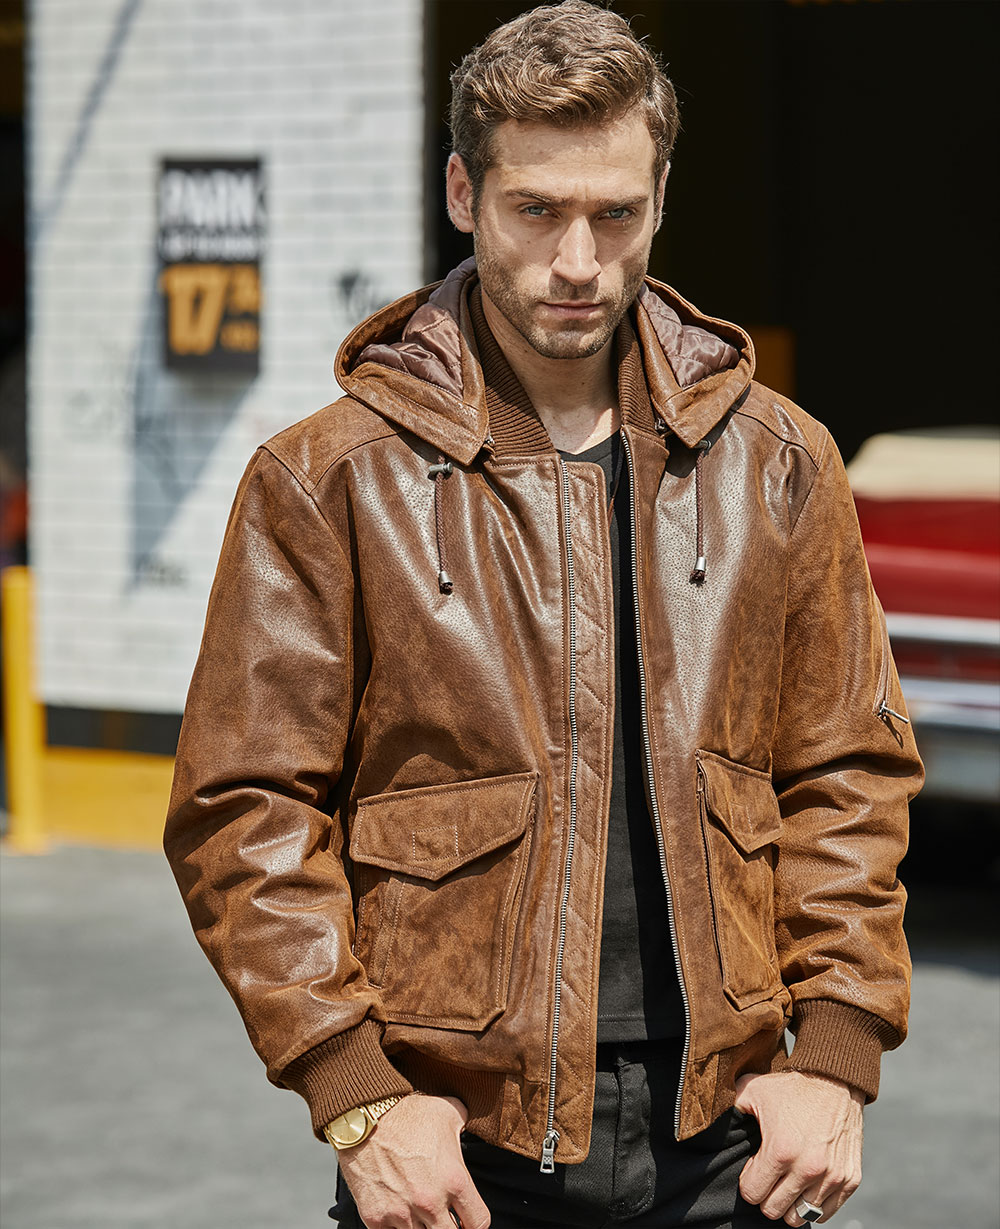 leather jacket buyThe Best Inexpensive Online Clothing Stores You May Want  > OFF-73% Free Shipping & Fast Shippment!